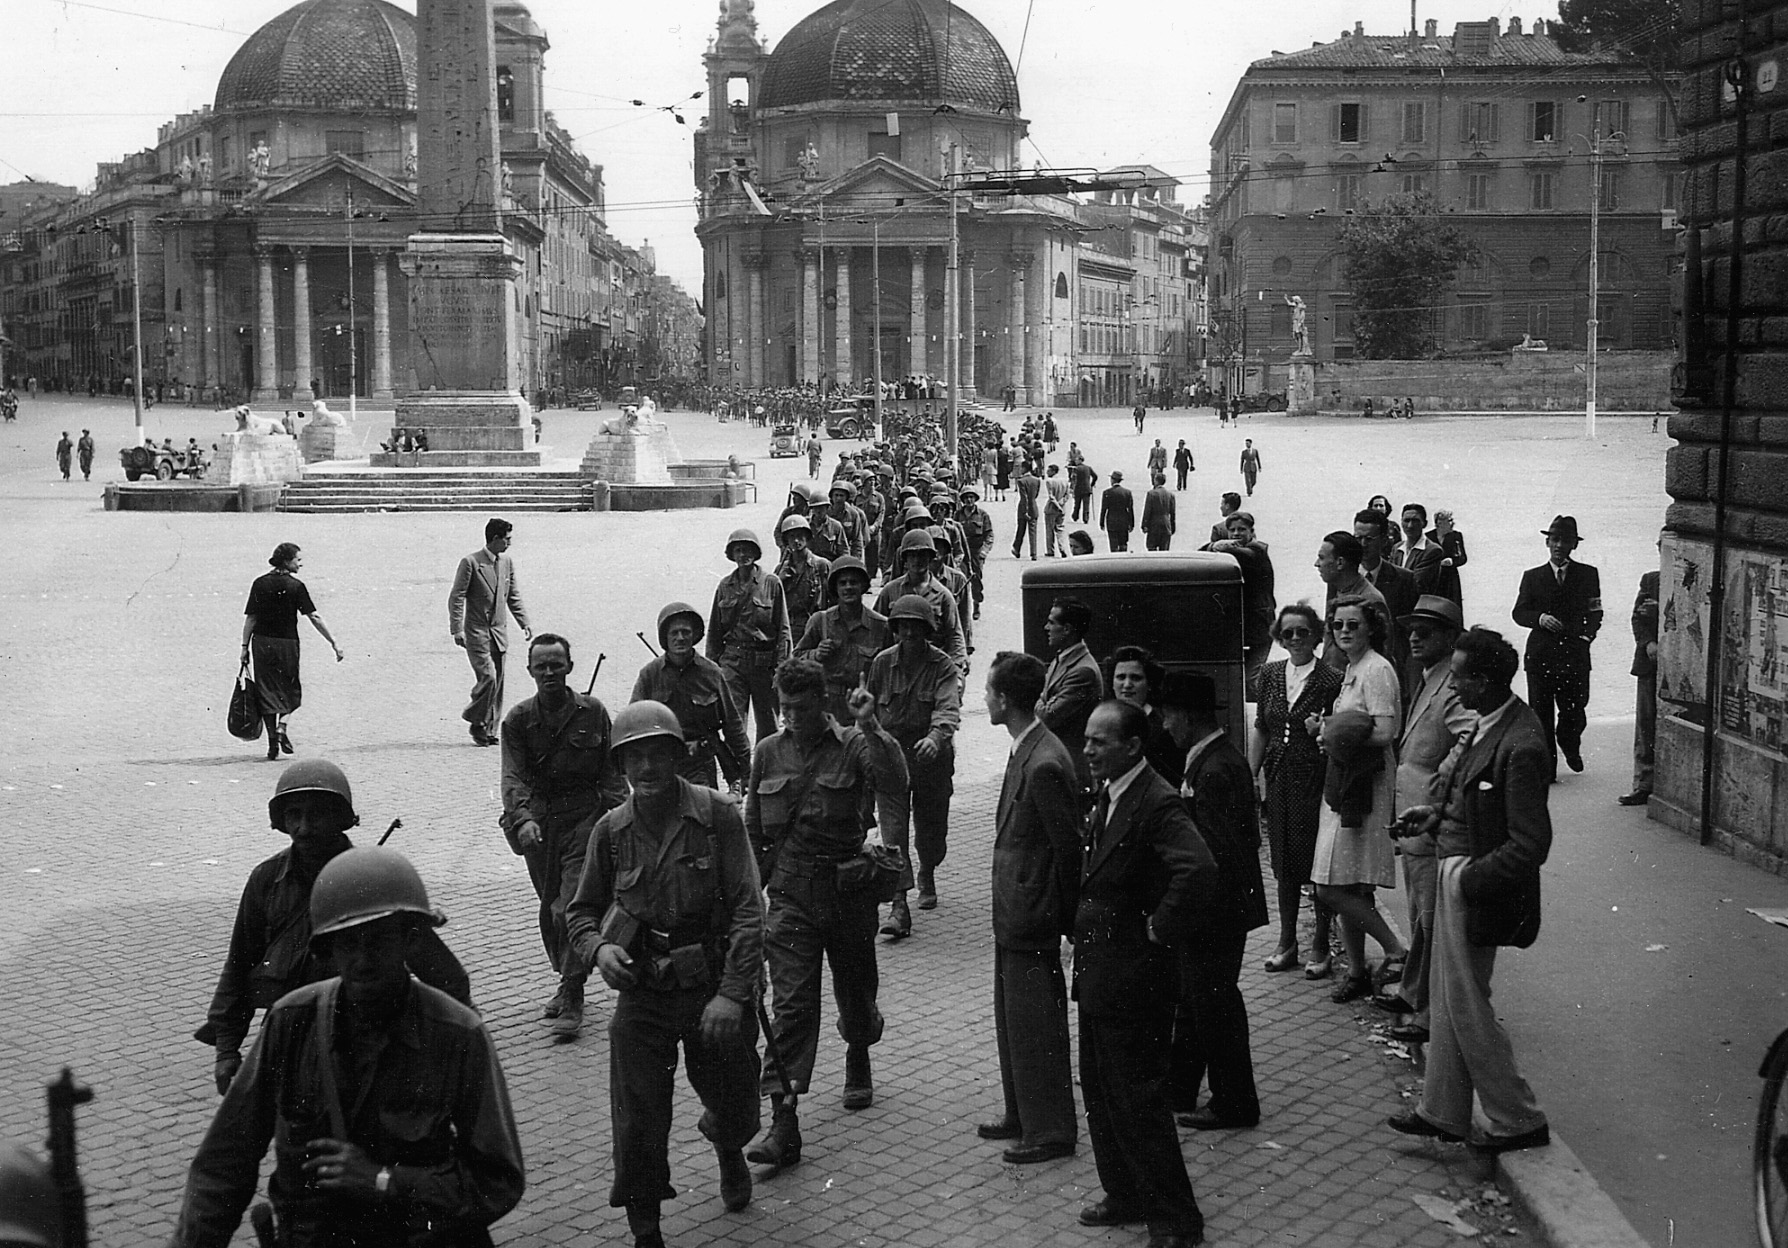 En route to the front, soldiers of the 85th Infantry Division march through the Piazza Del Popolo in the liberated Italian capital of Rome.